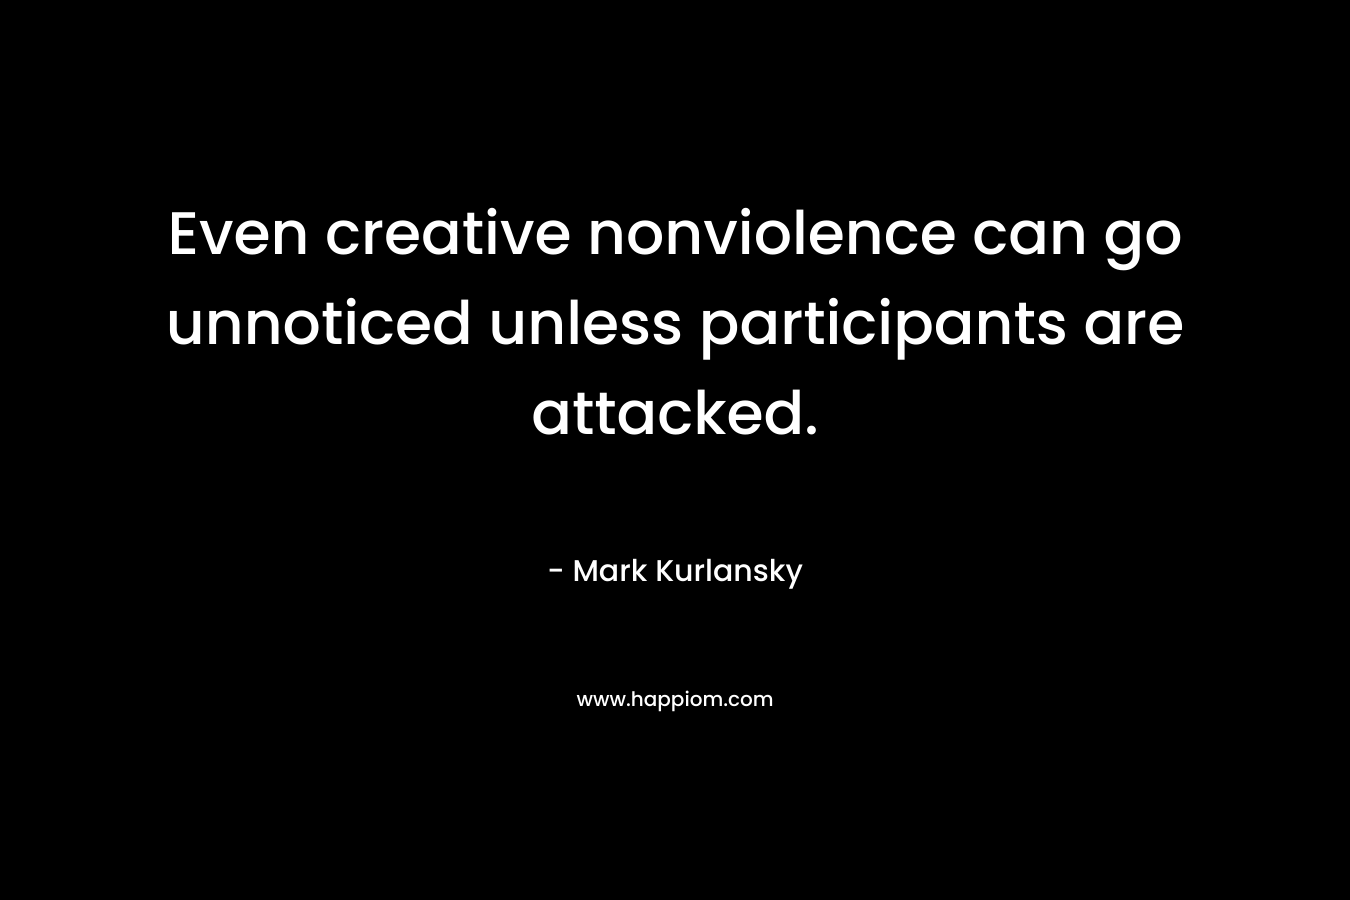 Even creative nonviolence can go unnoticed unless participants are attacked. – Mark Kurlansky